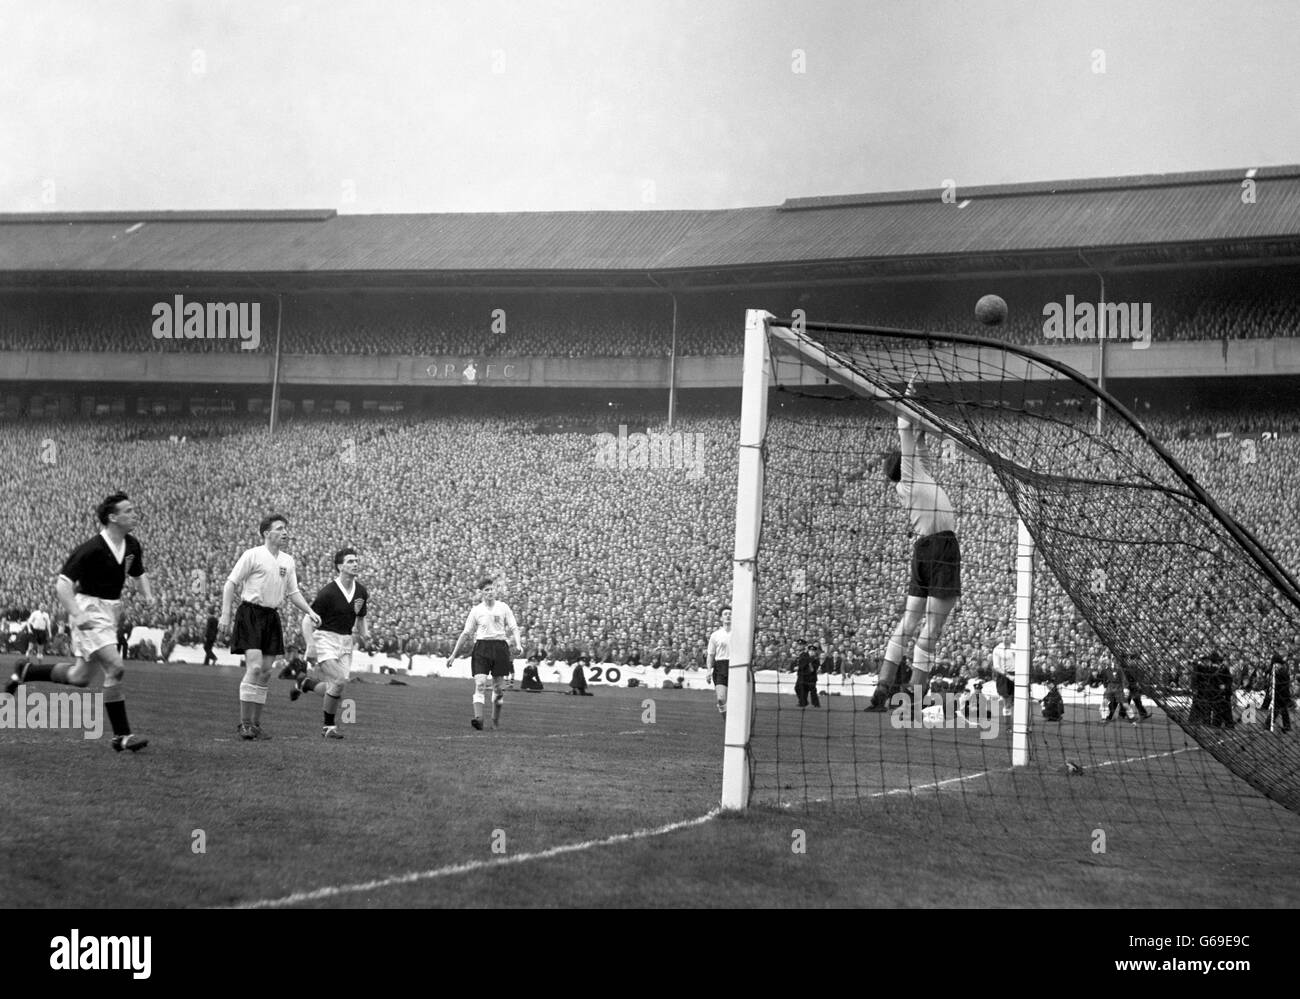 England's goalkeeper Reg Matthews tips the ball over the bar during a football match against Scotland at Hampden Park in Glasgow. (l-r) Lawrie Reilly, Roger Byrne, Gordon Smith, James Dickinson and Jeffrey Hall. Stock Photo